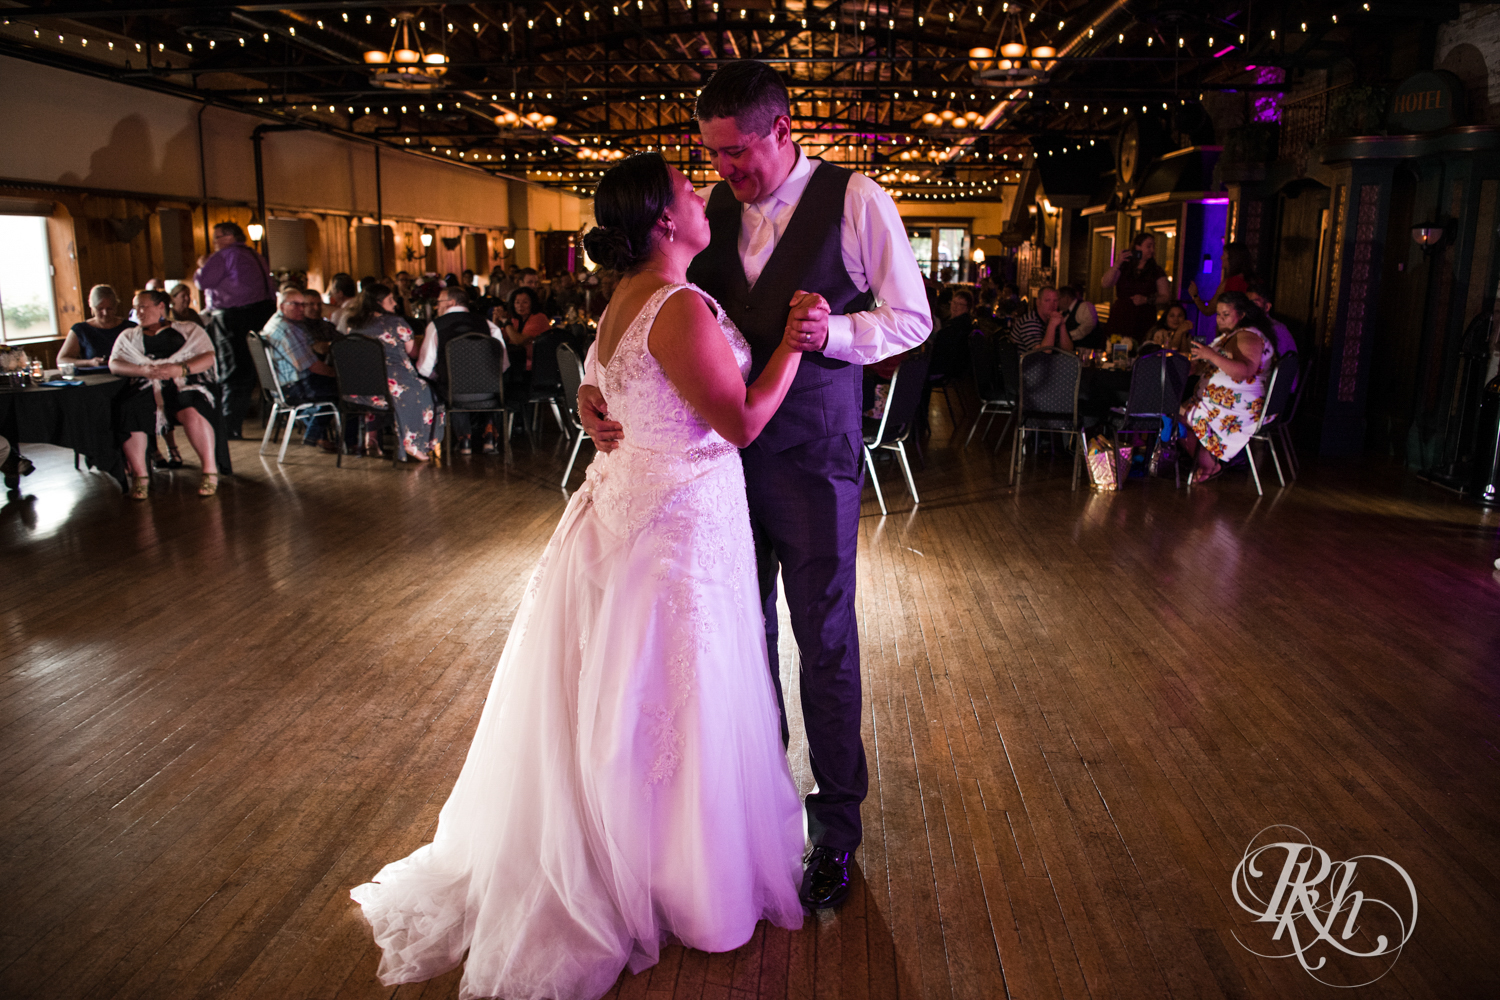 Bride and groom dance during wedding reception at Kellerman's Event Center in White Bear Lake, Minnesota.